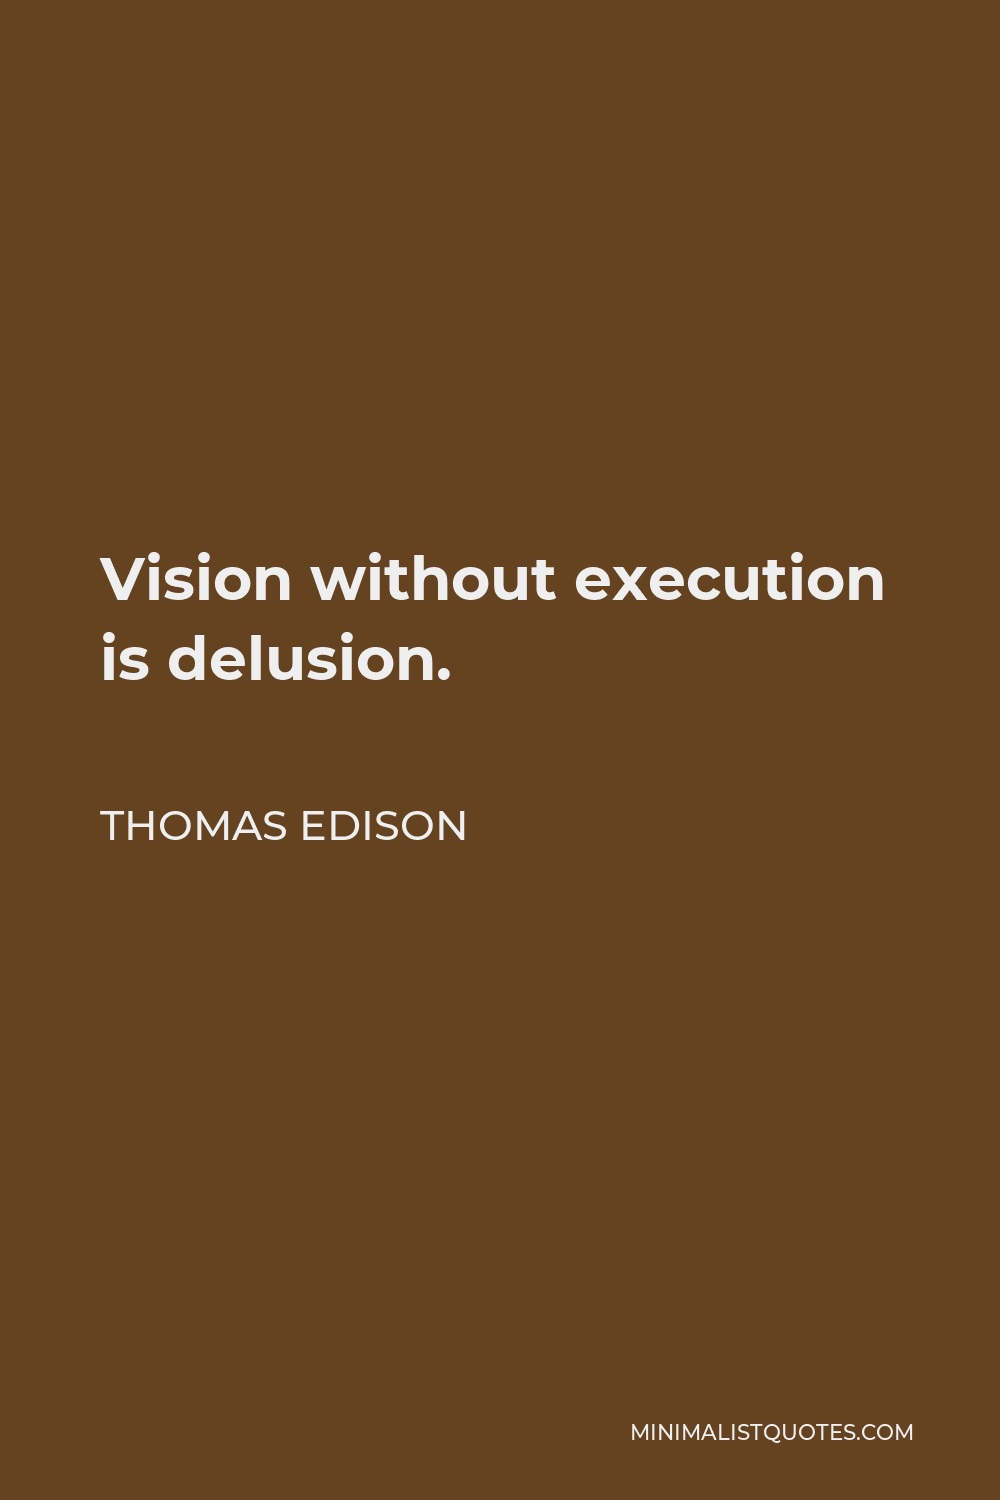 Thomas Edison Quote - Vision without execution is delusion.